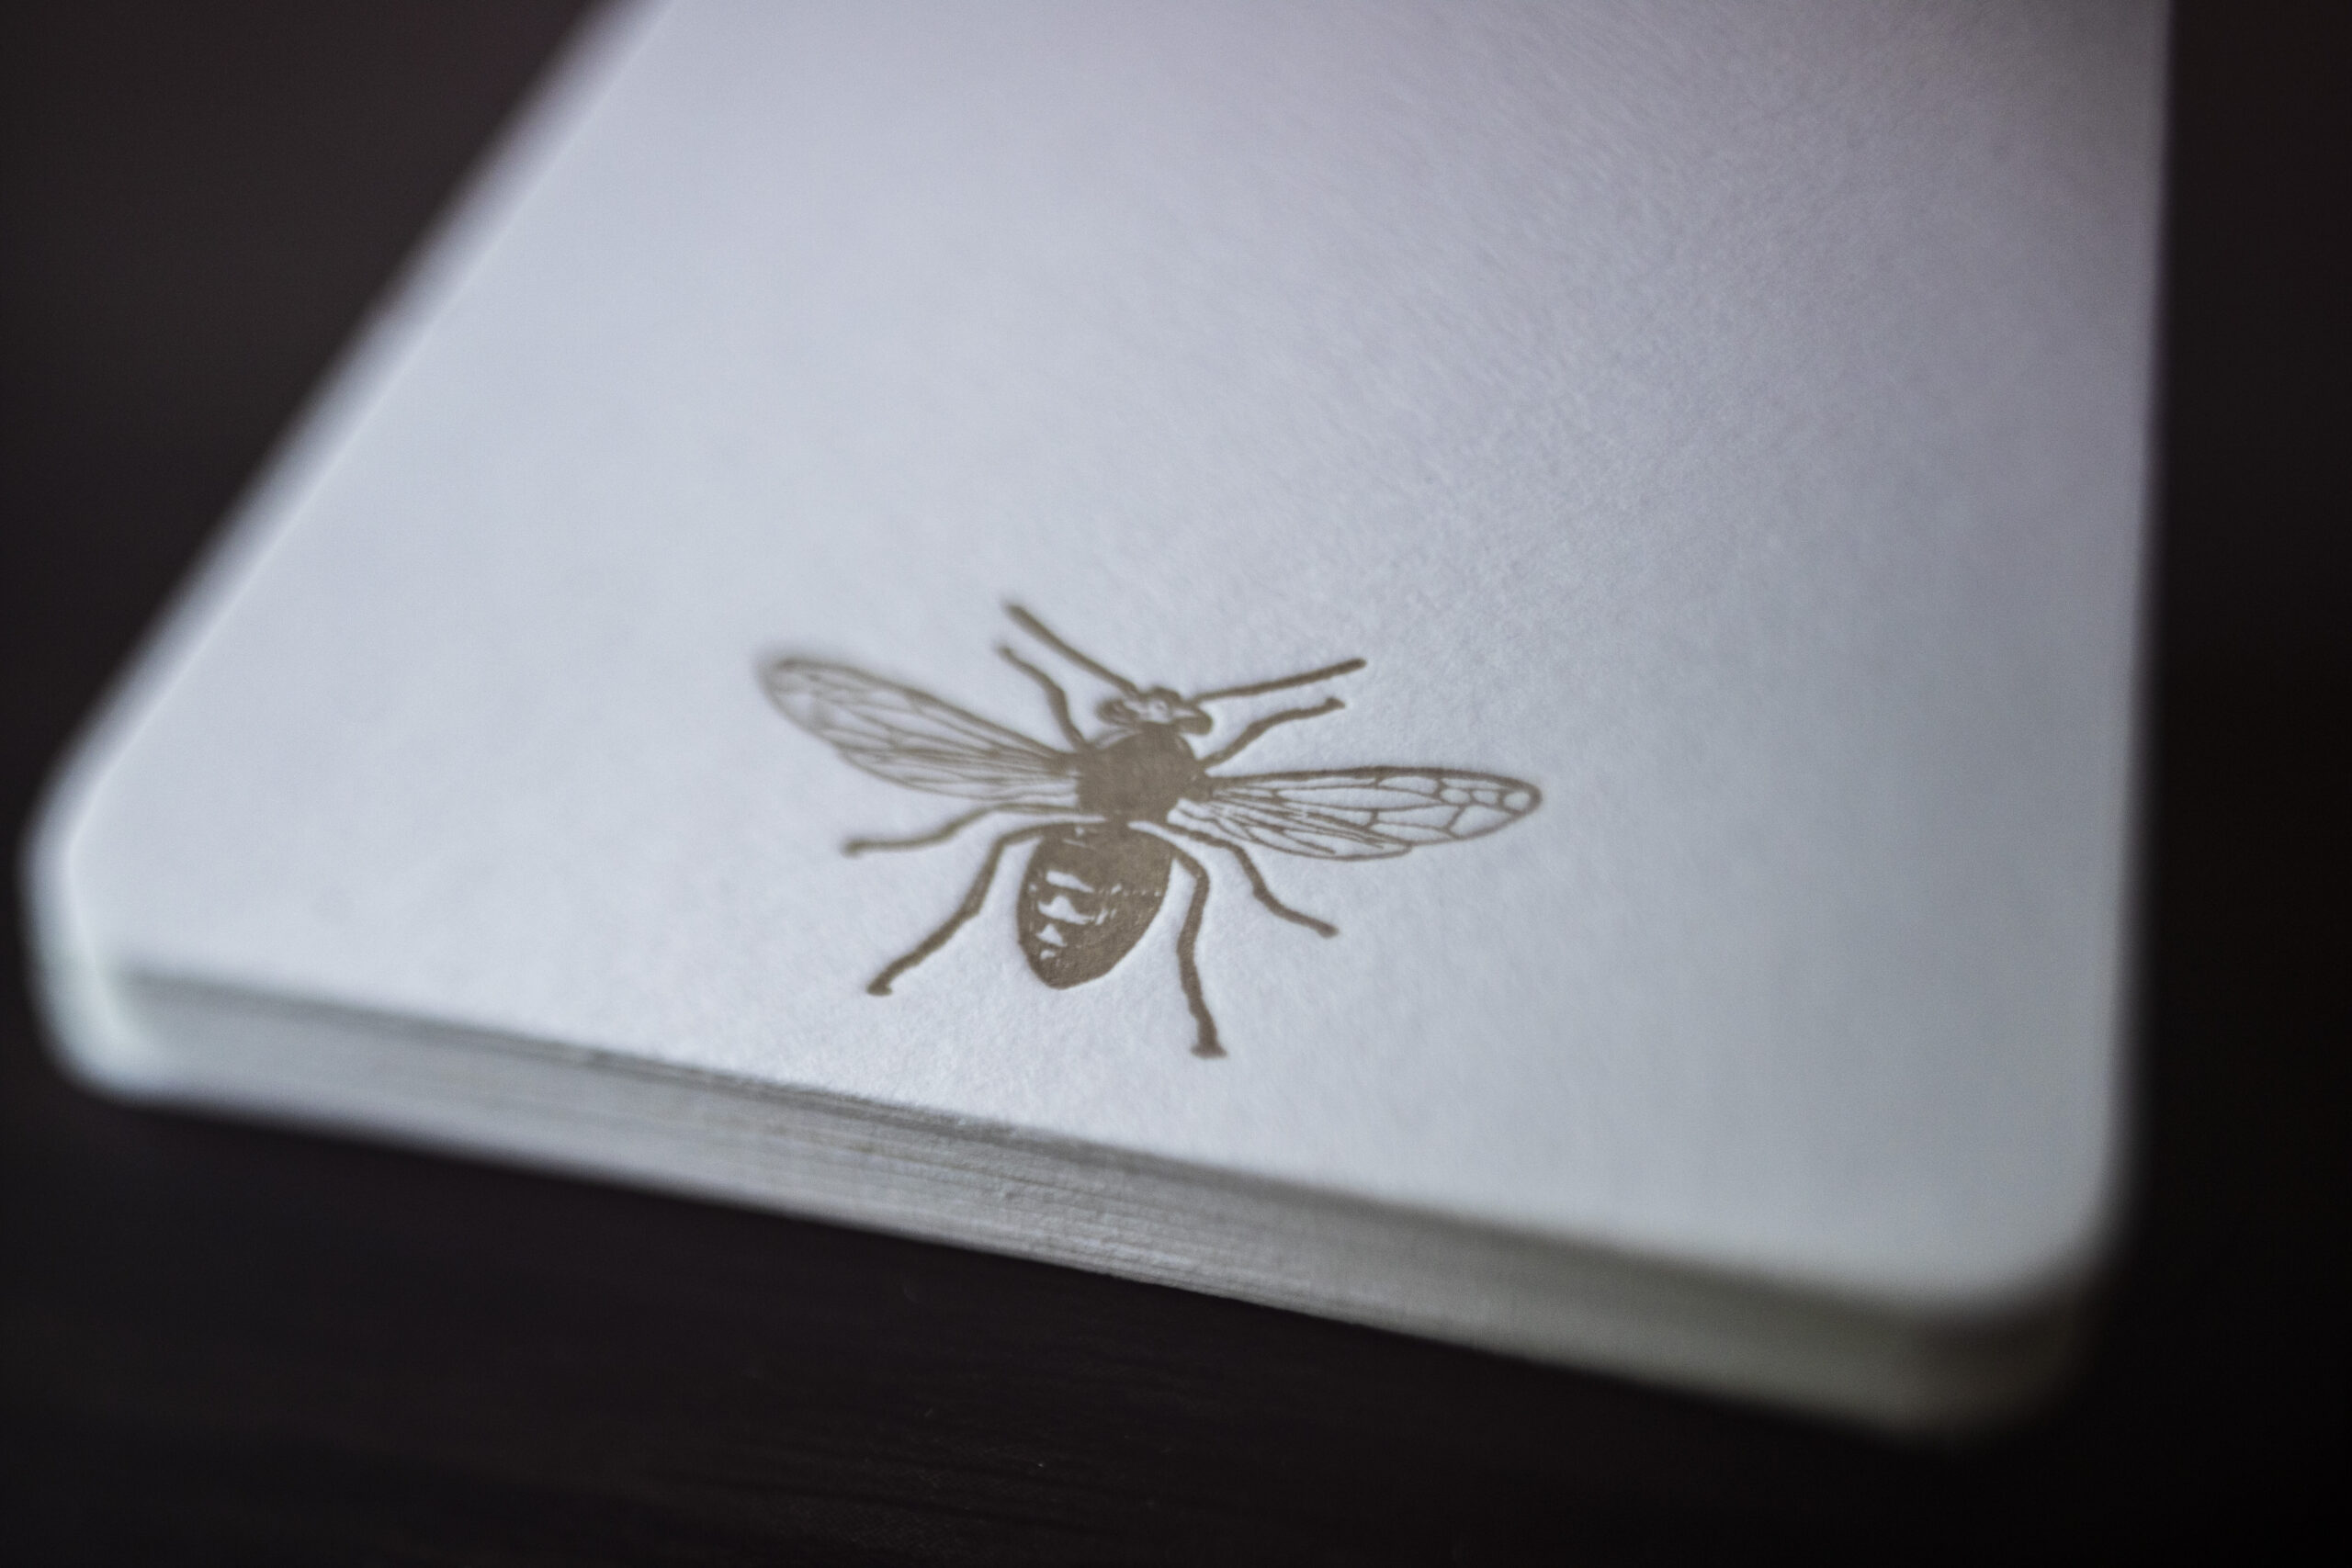 Honey Bee Small Note Cards